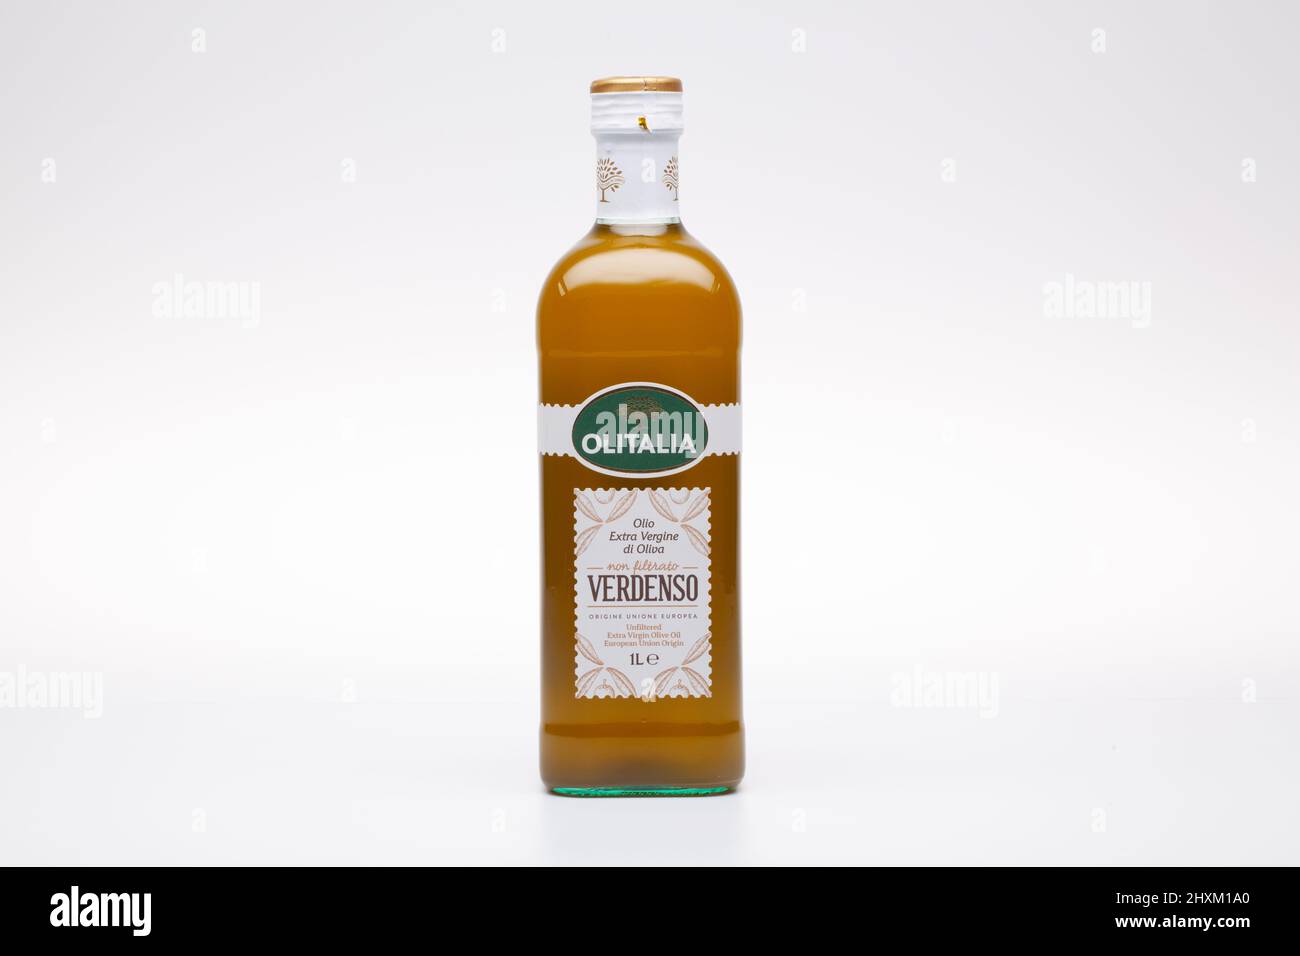 Prague,Czech Republic - 10 December ,2020: Verdenso olive oil on the white background. Olitalia, an Italian company specialized in oils and vinegars. Stock Photo